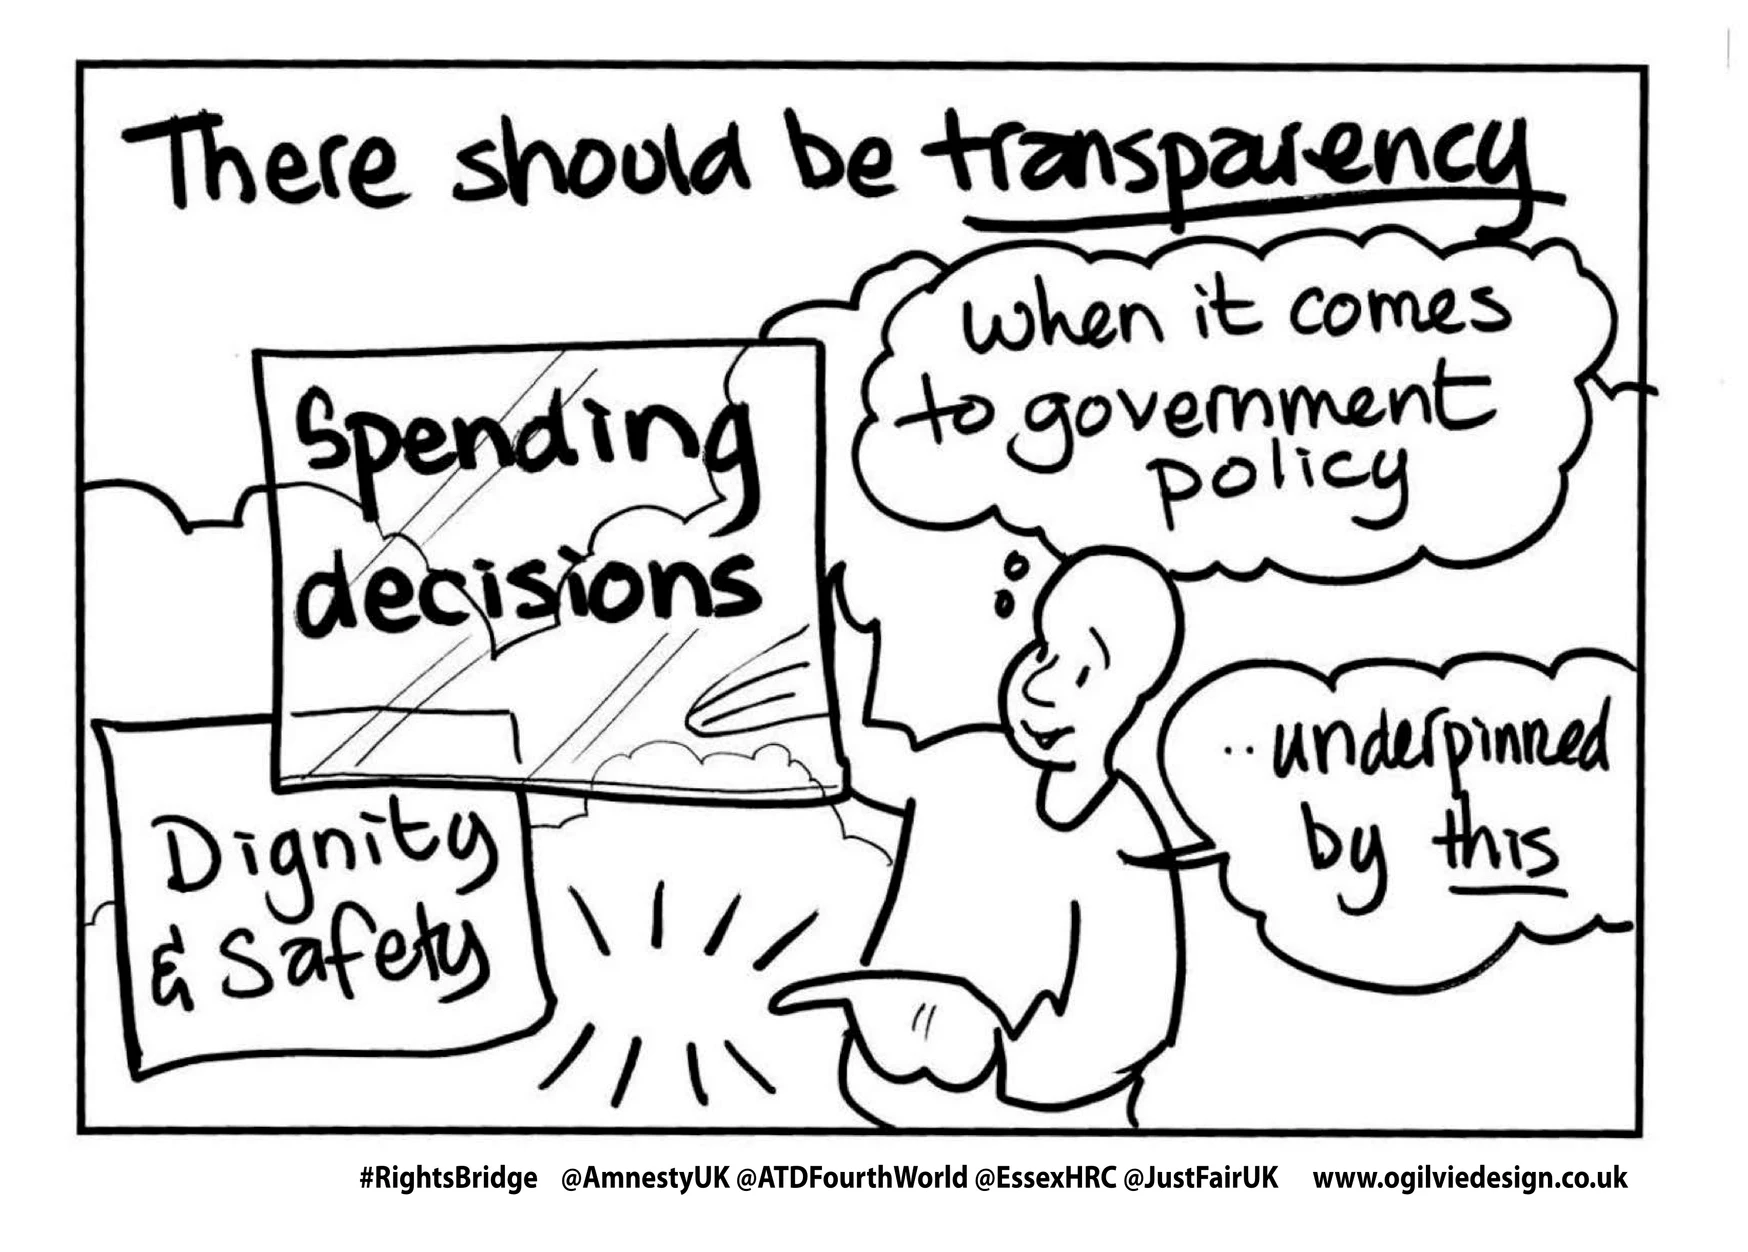 Image showing a person holding a sign with a person thinking that when it comes to government policy, beyond it being underpinned by spending decisions, there should be transparency to preserve dignity and safety.